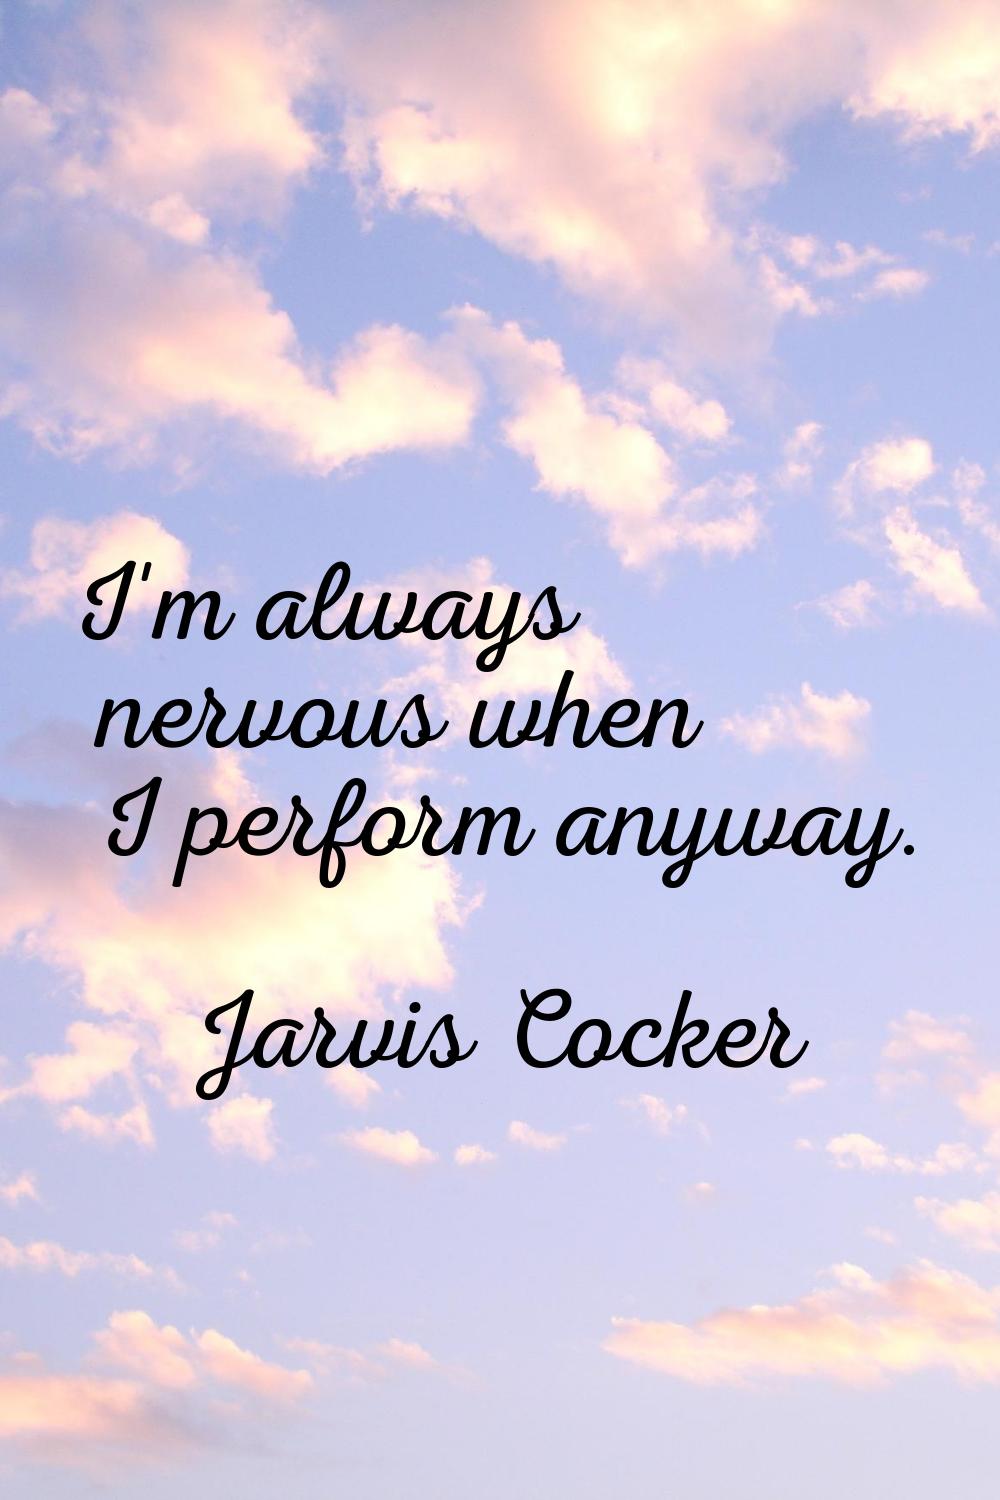 I'm always nervous when I perform anyway.